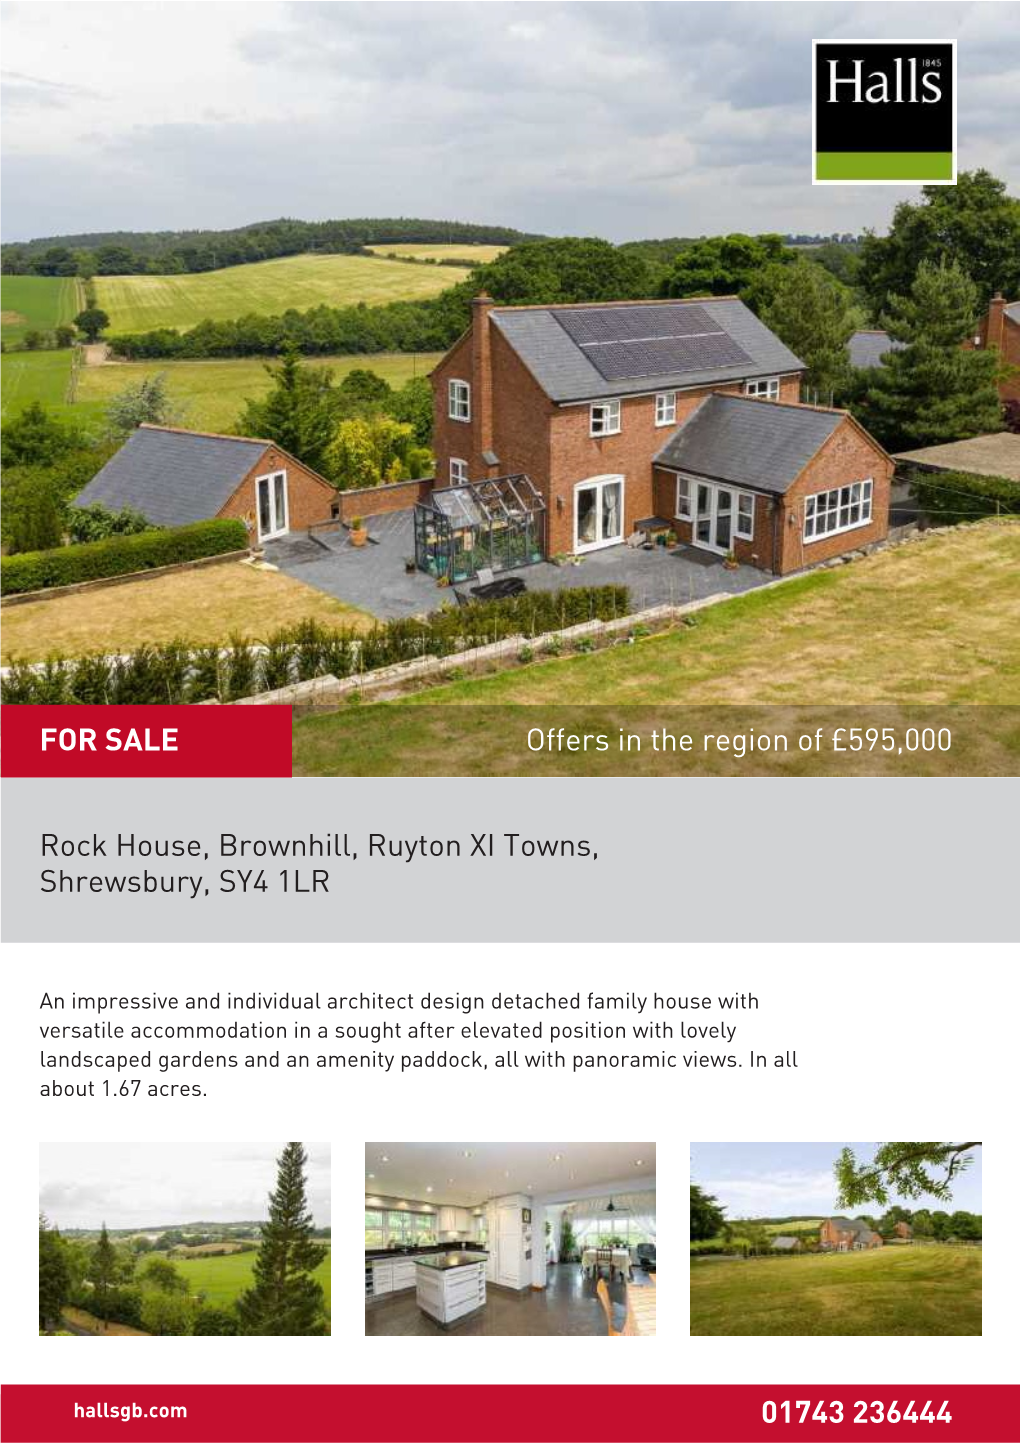 Rock House, Brownhill, Ruyton XI Towns, Shrewsbury, SY4 1LR 01743 236444 Offers in the Region of £595,000 for SALE